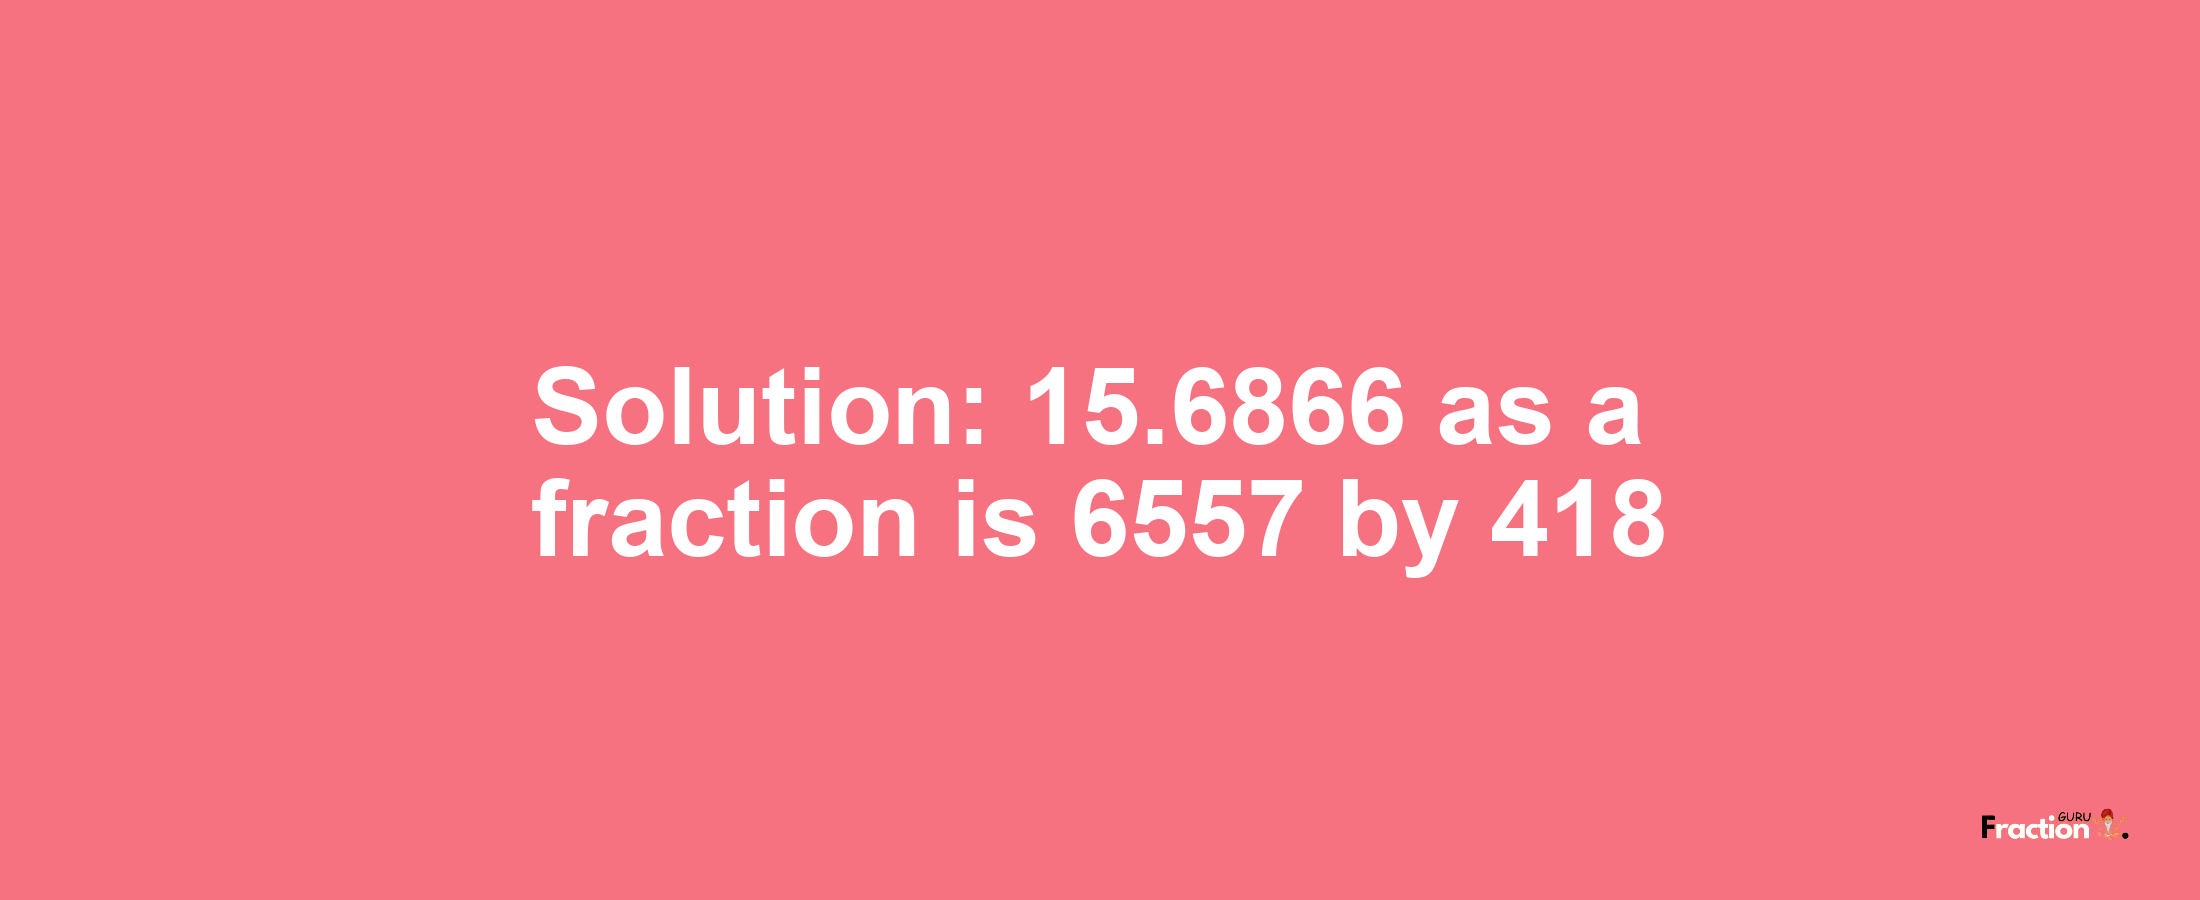 Solution:15.6866 as a fraction is 6557/418